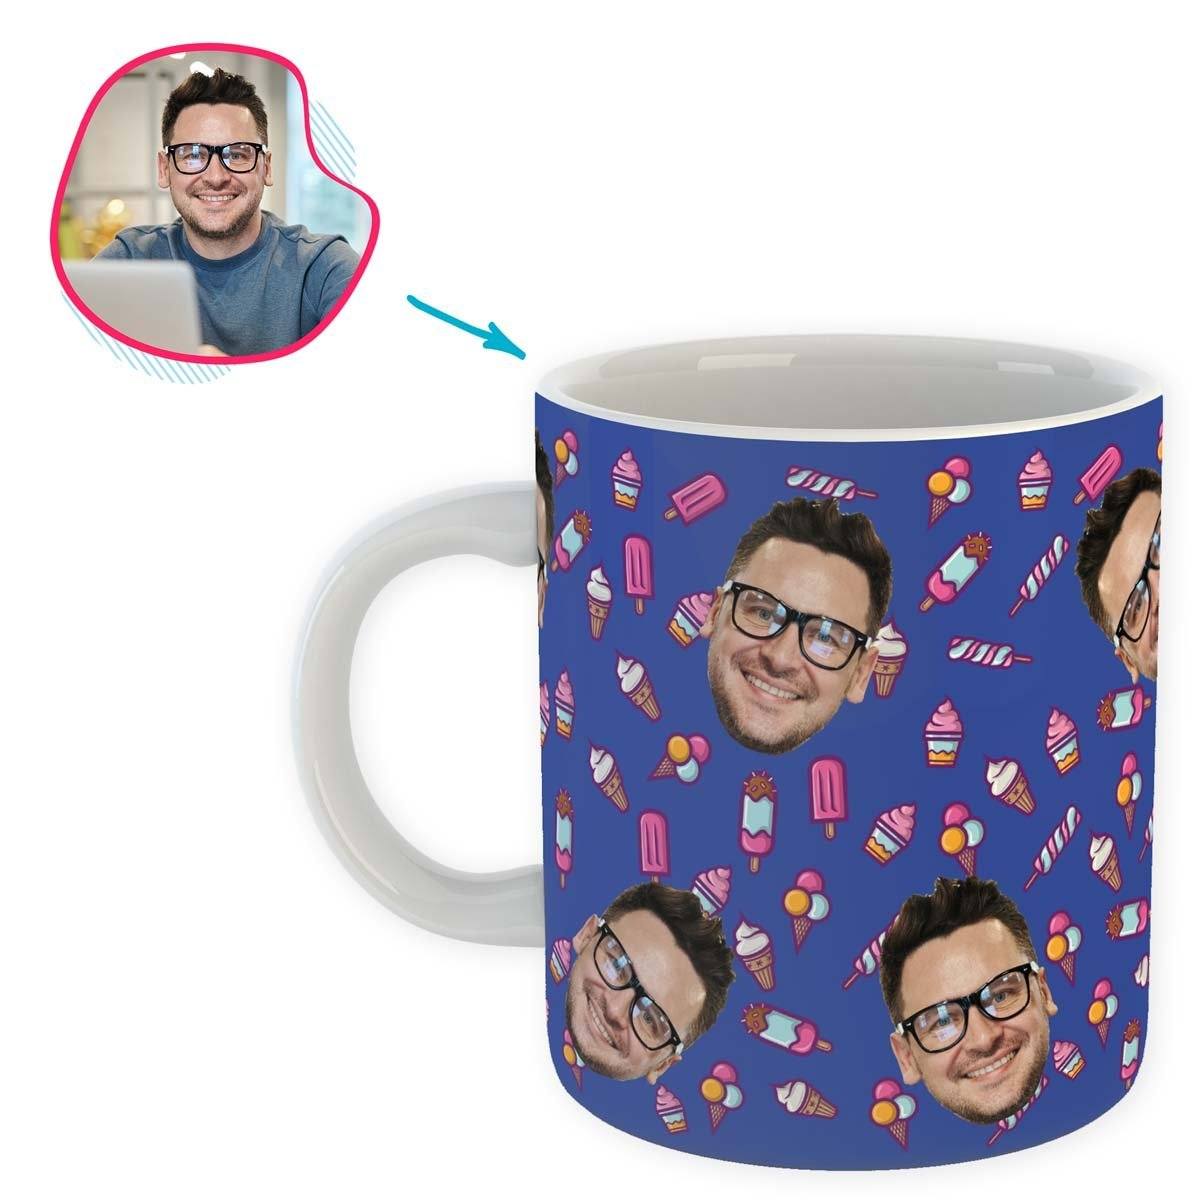 darkblue Candies mug personalized with photo of face printed on it